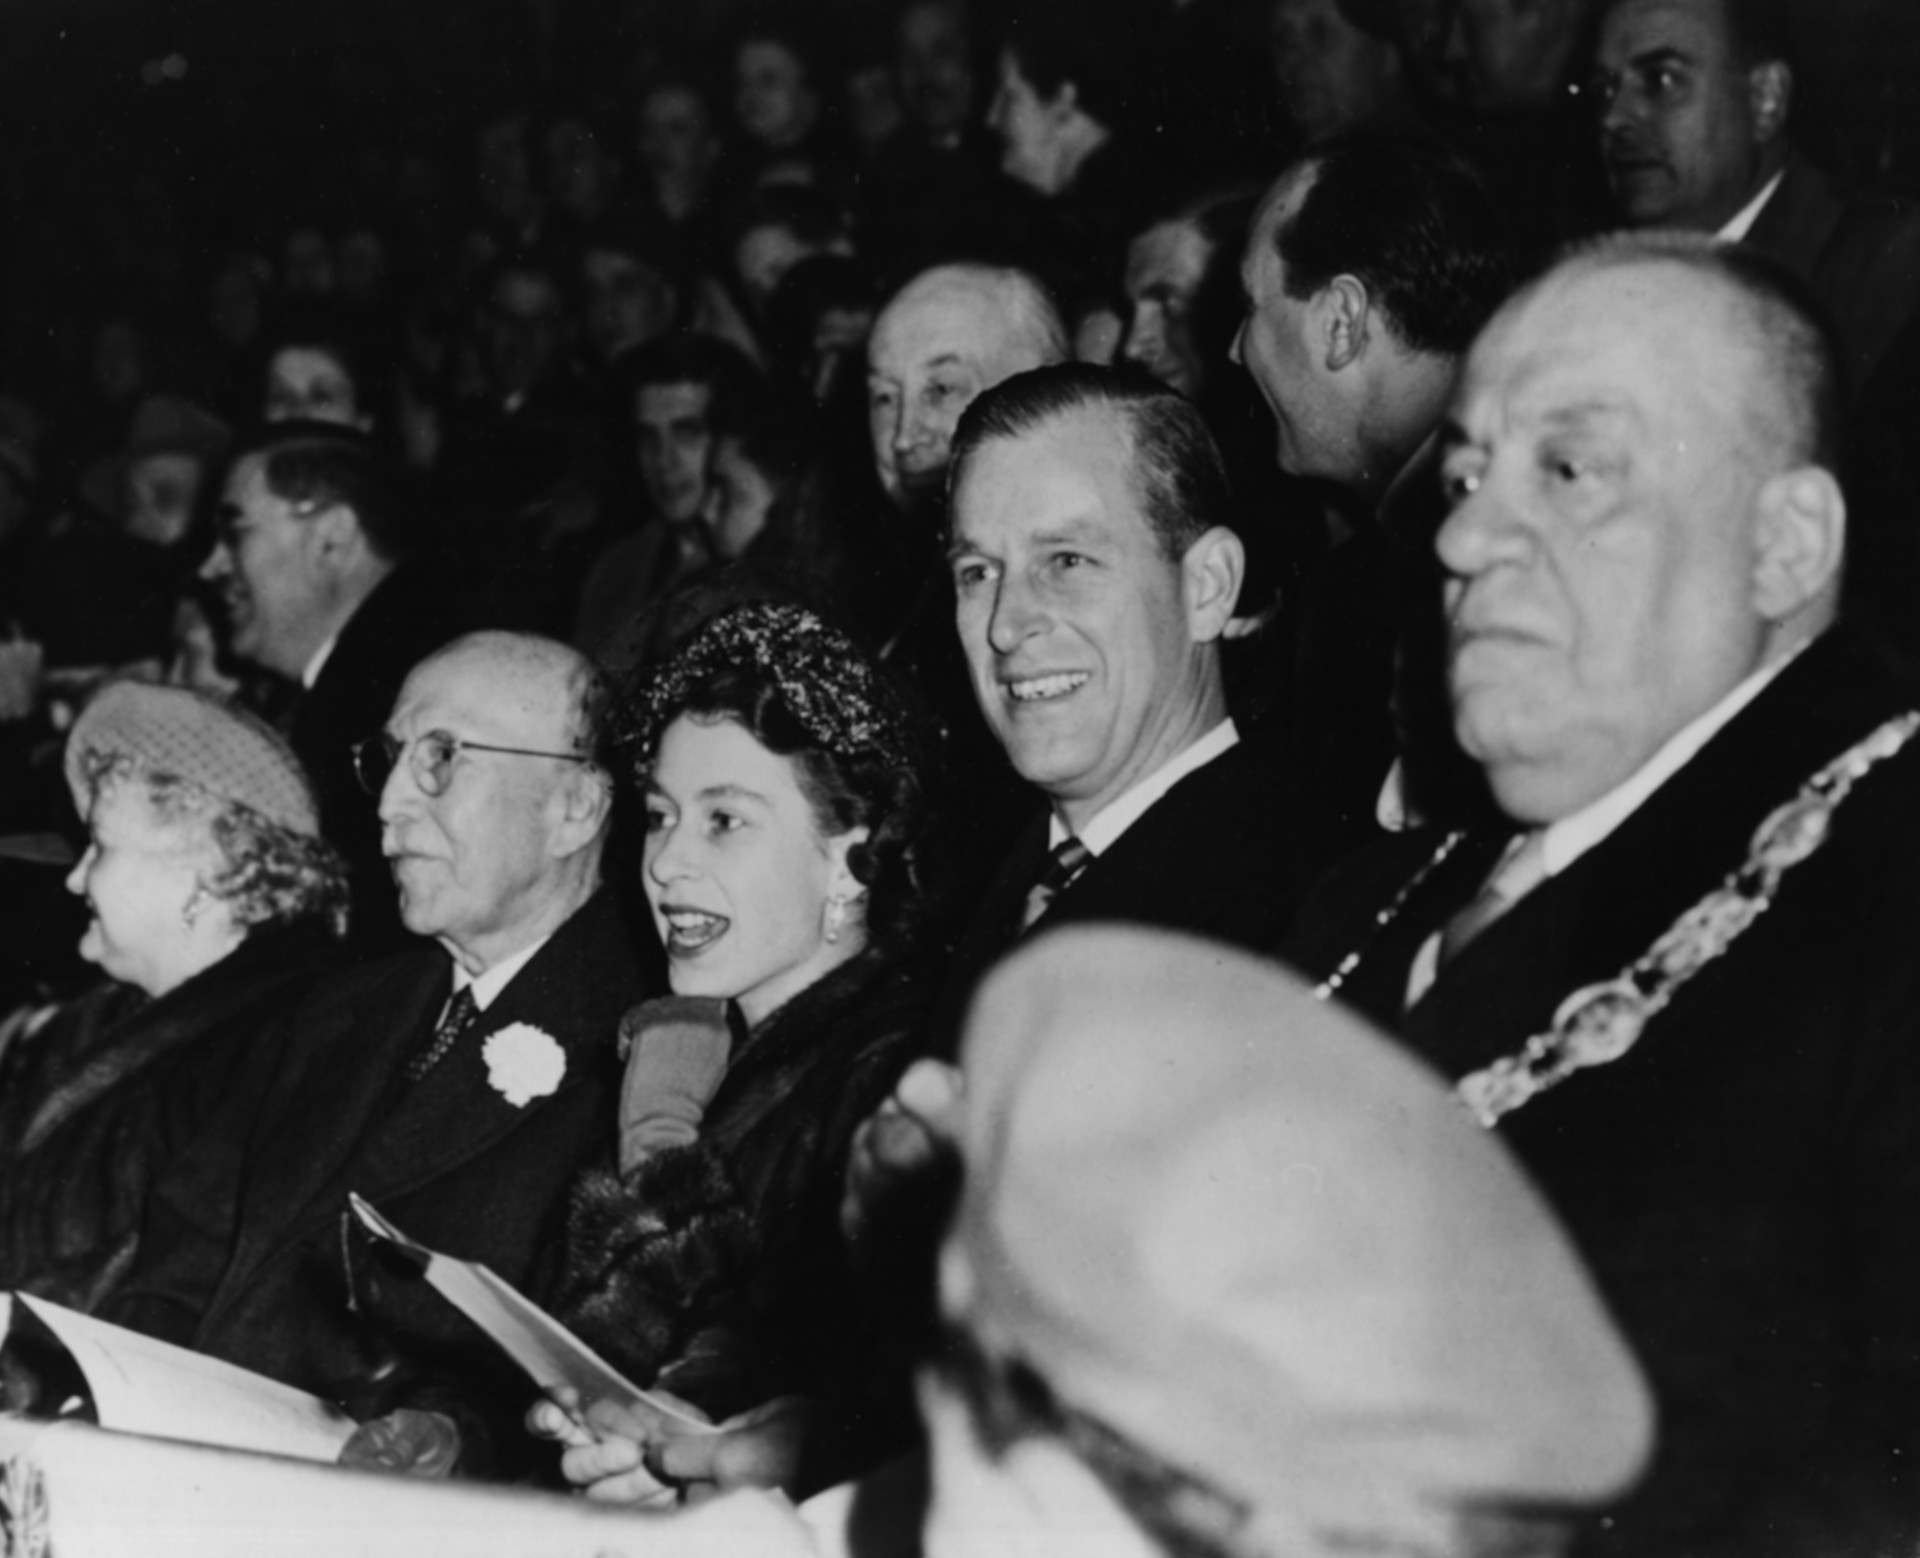 Princess Elizabeth and Prince Philip watch an ice hockey game with Mayor Camillien Houde in Montreal.<p>You may also like:<a href="https://www.starsinsider.com/n/261671?utm_source=msn.com&utm_medium=display&utm_campaign=referral_description&utm_content=202921v11en-nz"> Celebs reveal the stories behind their stage names</a></p>